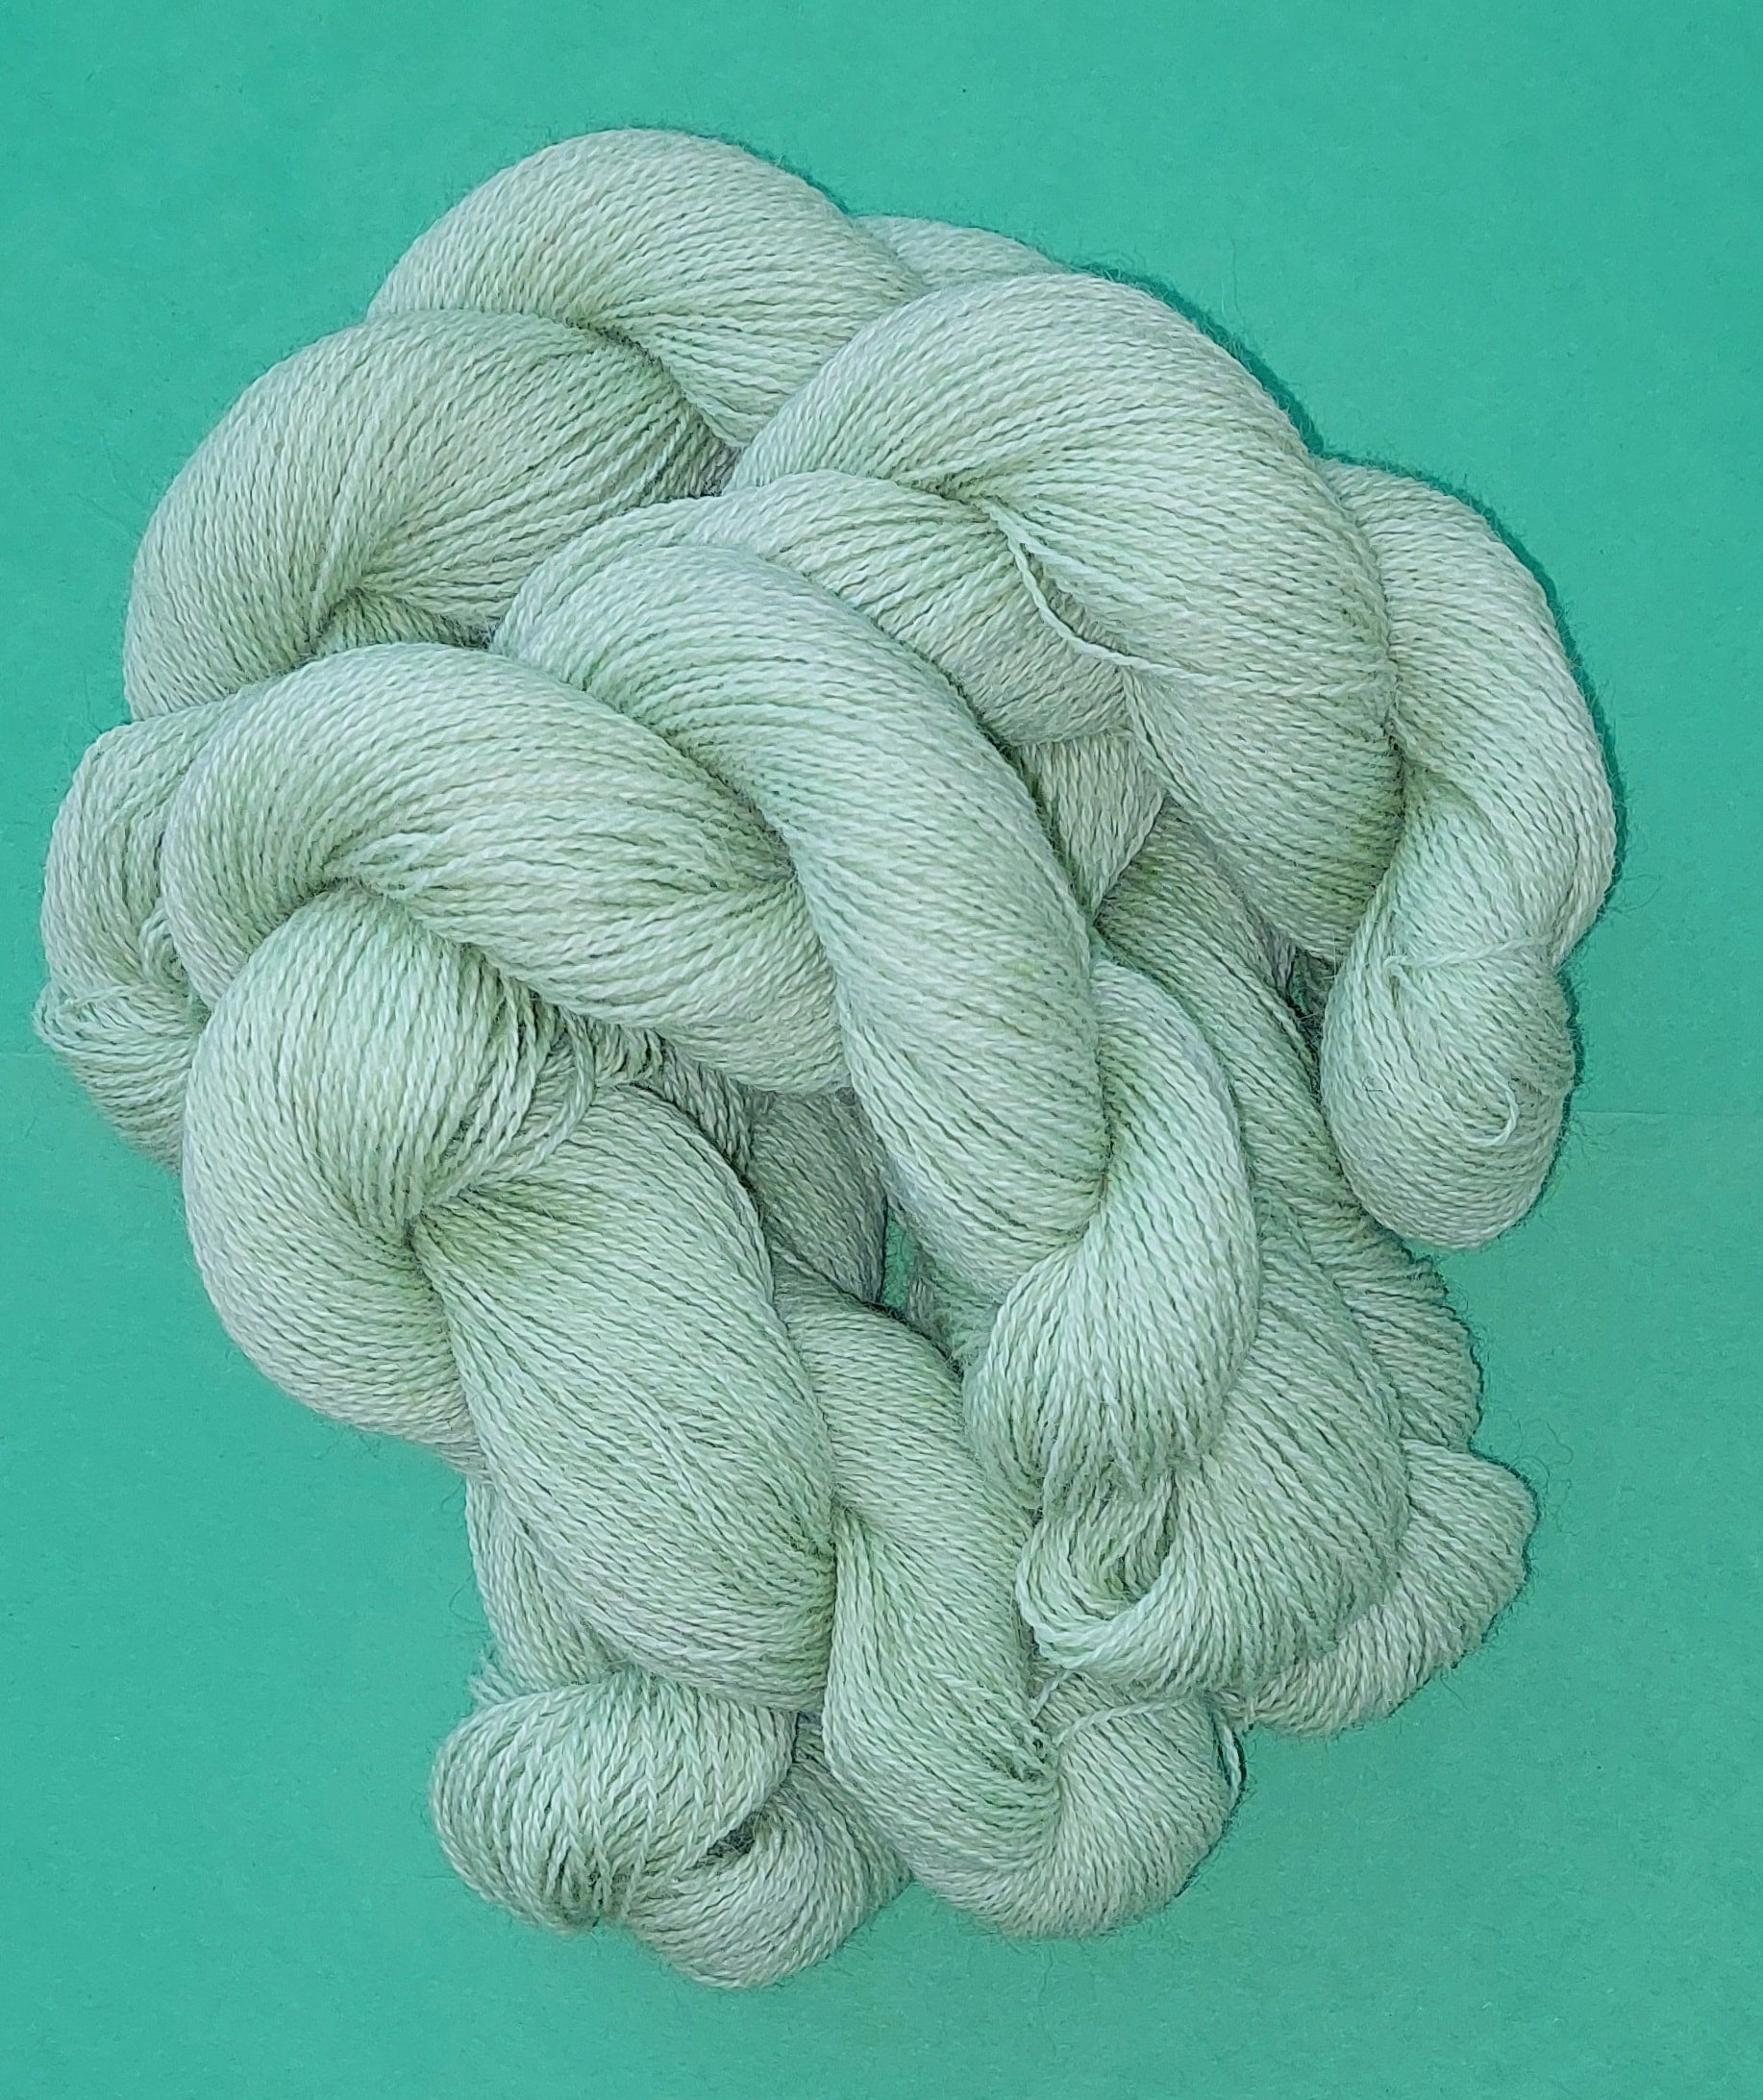 100% Alpaca Yarn 2 Ply Worsted Weight Light Fawn – The Alpaca Boutique